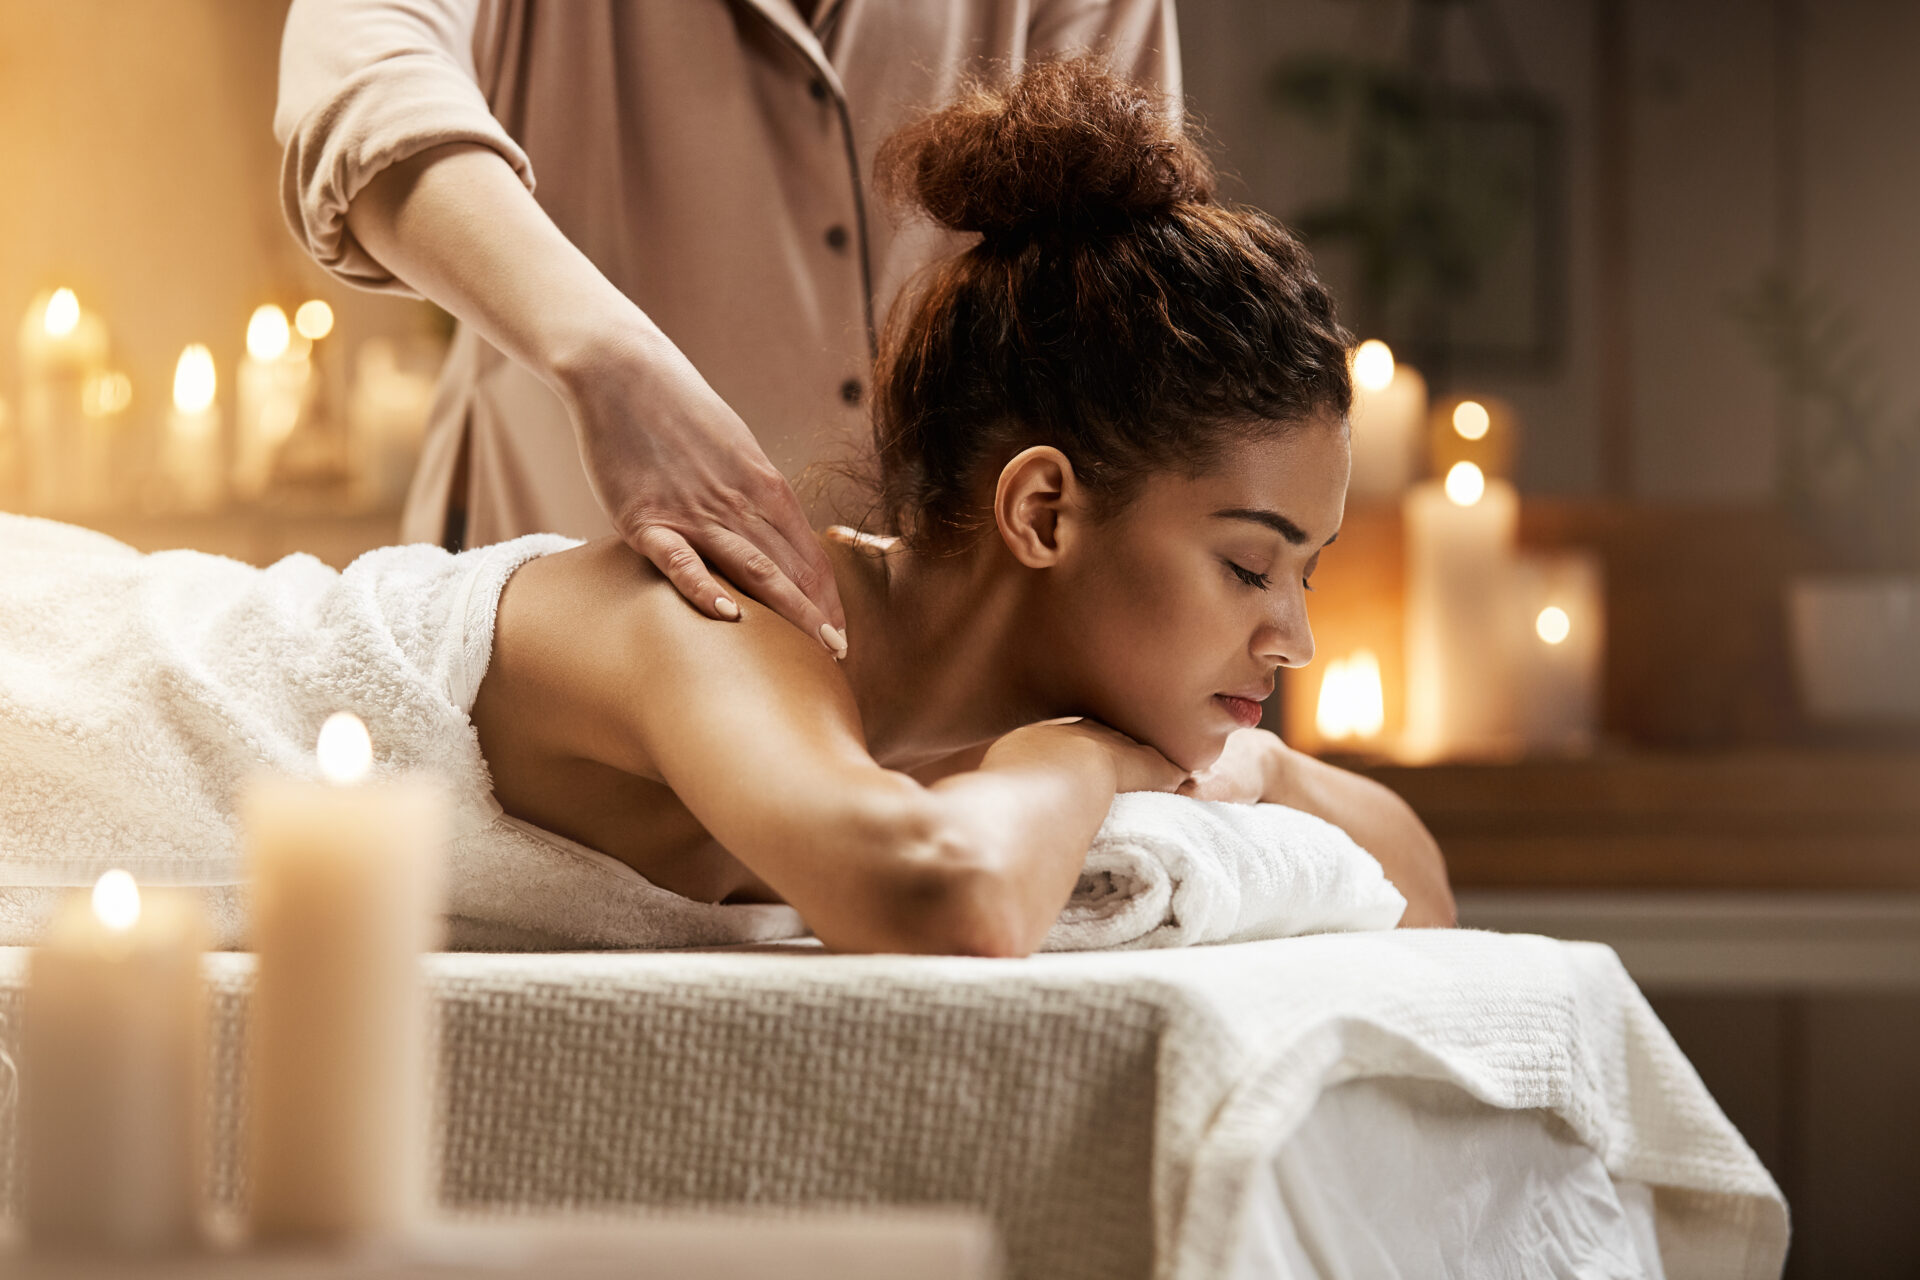 How to become a massage therapist